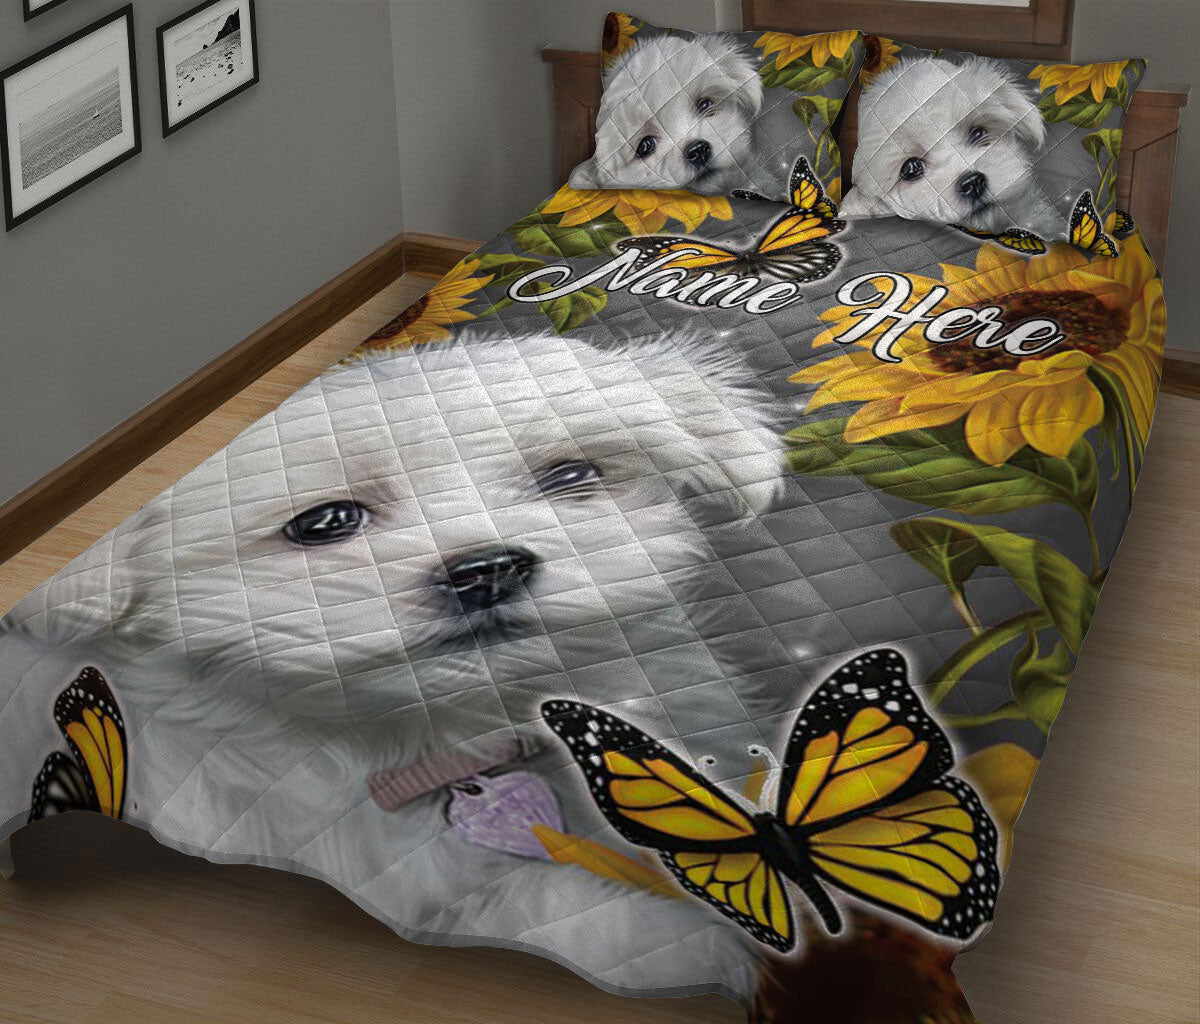 Ohaprints-Quilt-Bed-Set-Pillowcase-White-Shih-Tzu-Shitzu-Dog-Butterfly-Sunflower-Floral-Custom-Personalized-Name-Blanket-Bedspread-Bedding-135-King (90'' x 100'')